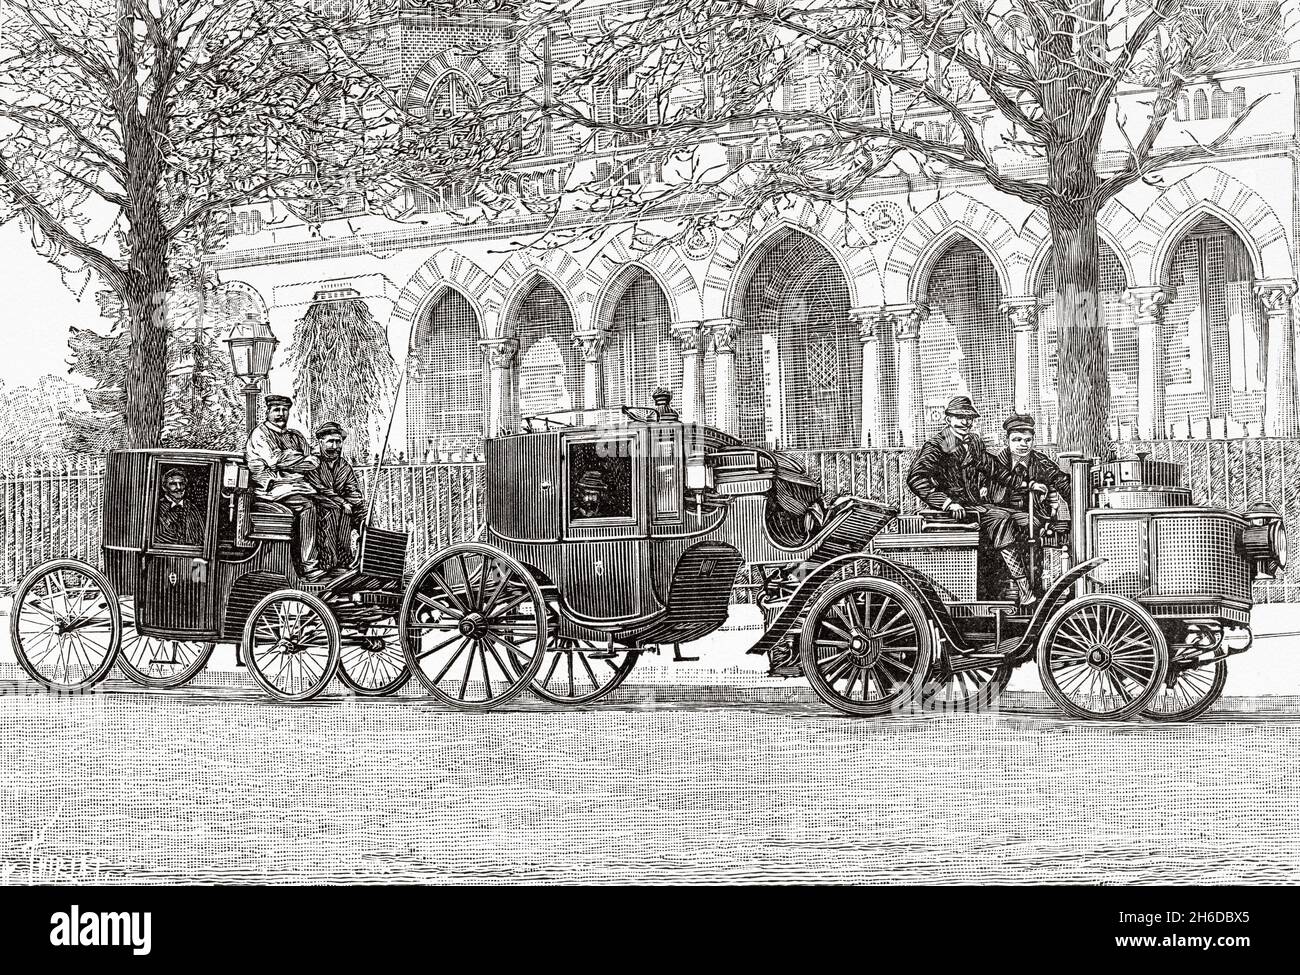 Dynamometric train having been used for the experiments of Mr. Michelin on the determination of the Coefficient of traction of the cars. Old 19th century engraved illustration from La Nature 1897 Stock Photo